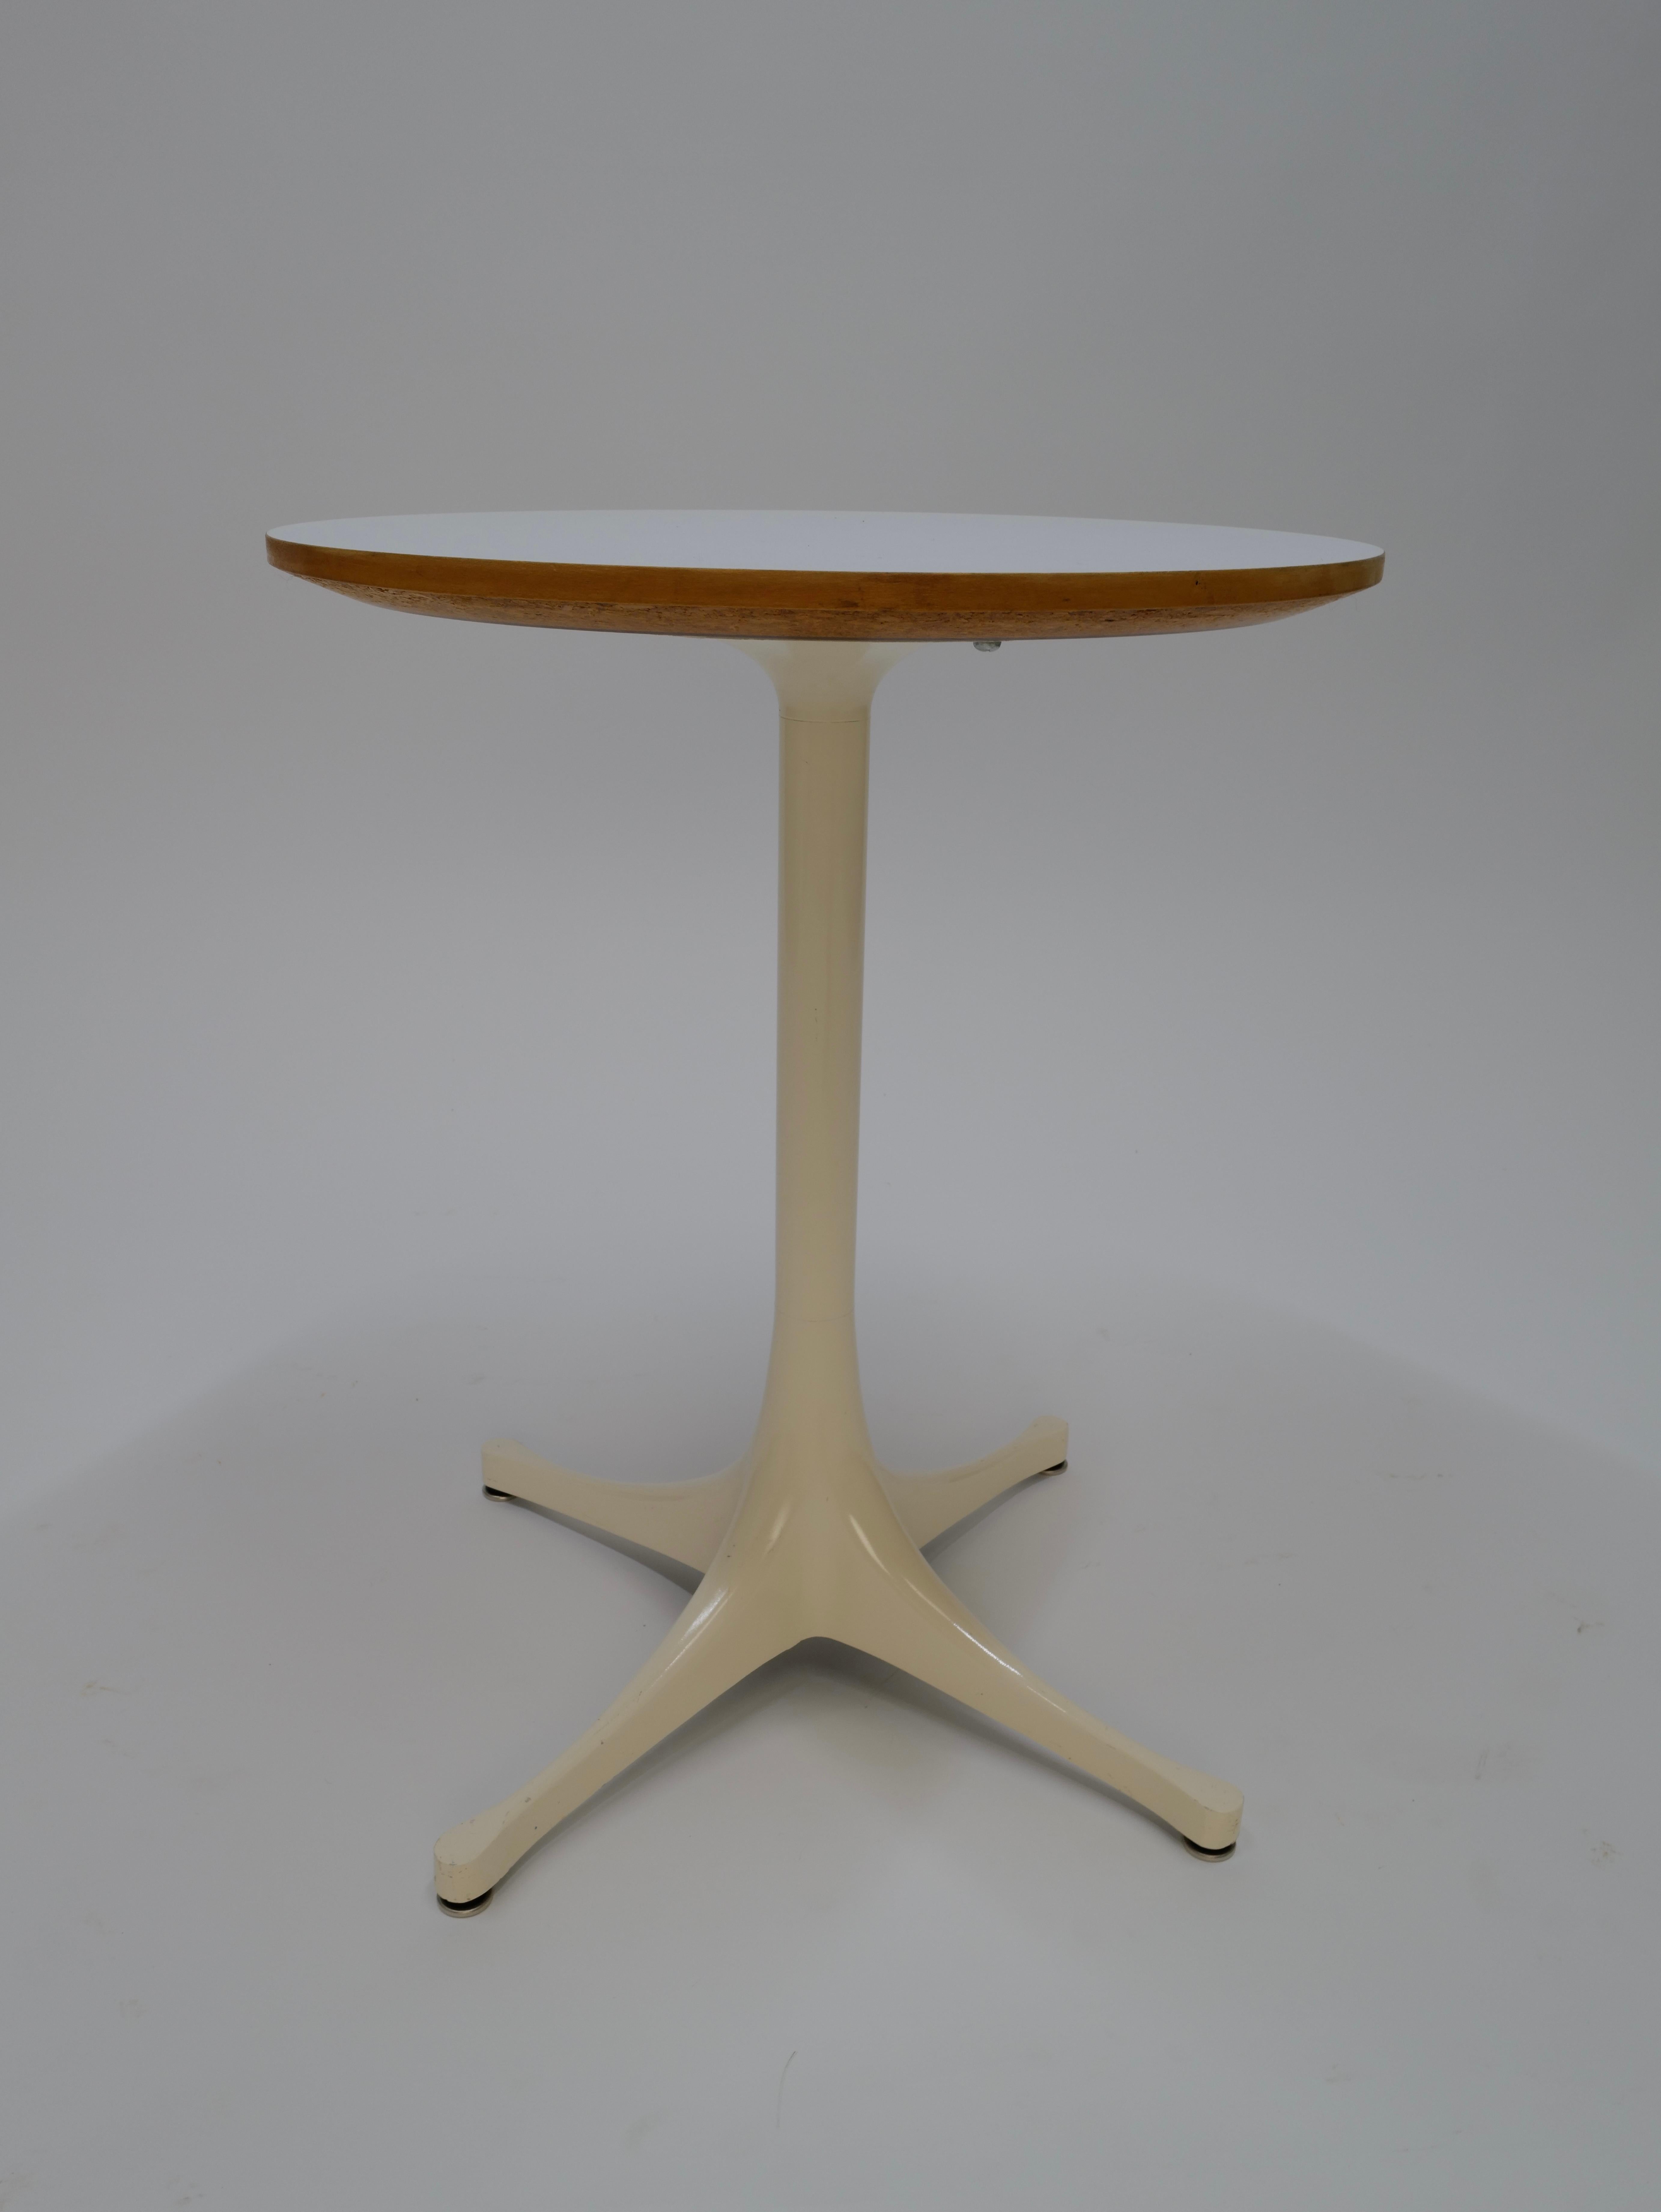 The George Nelson-designed round pedestal side table for Herman Miller features a timeless and sleek design. Crafted with meticulous attention to detail, it boasts a circular table surface supported by a slender pedestal base. The combination of